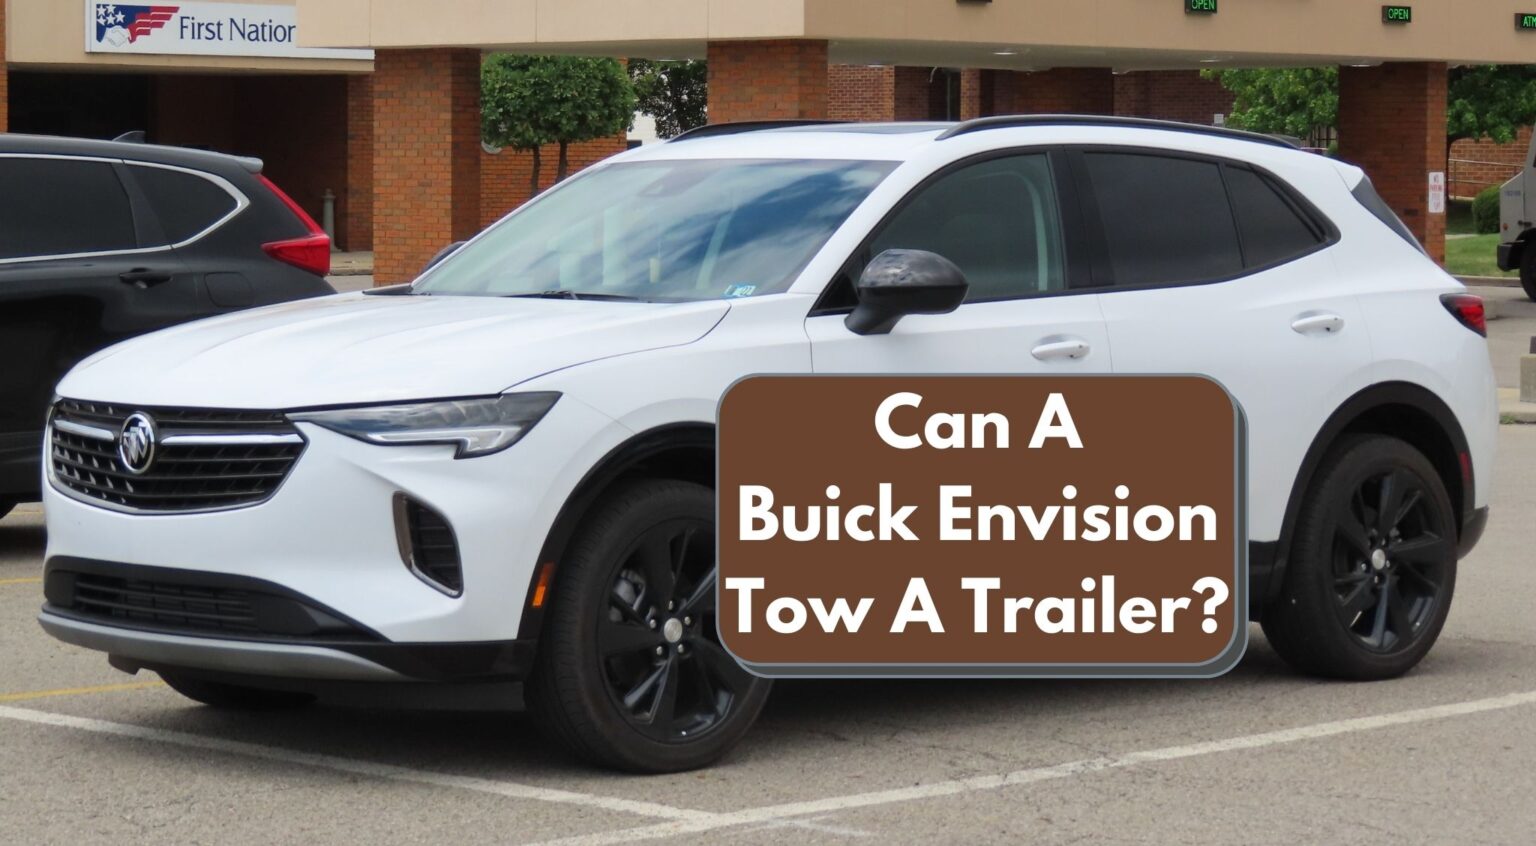 Can A Buick Envision Tow A Trailer? Buick Envision Towing Capacity